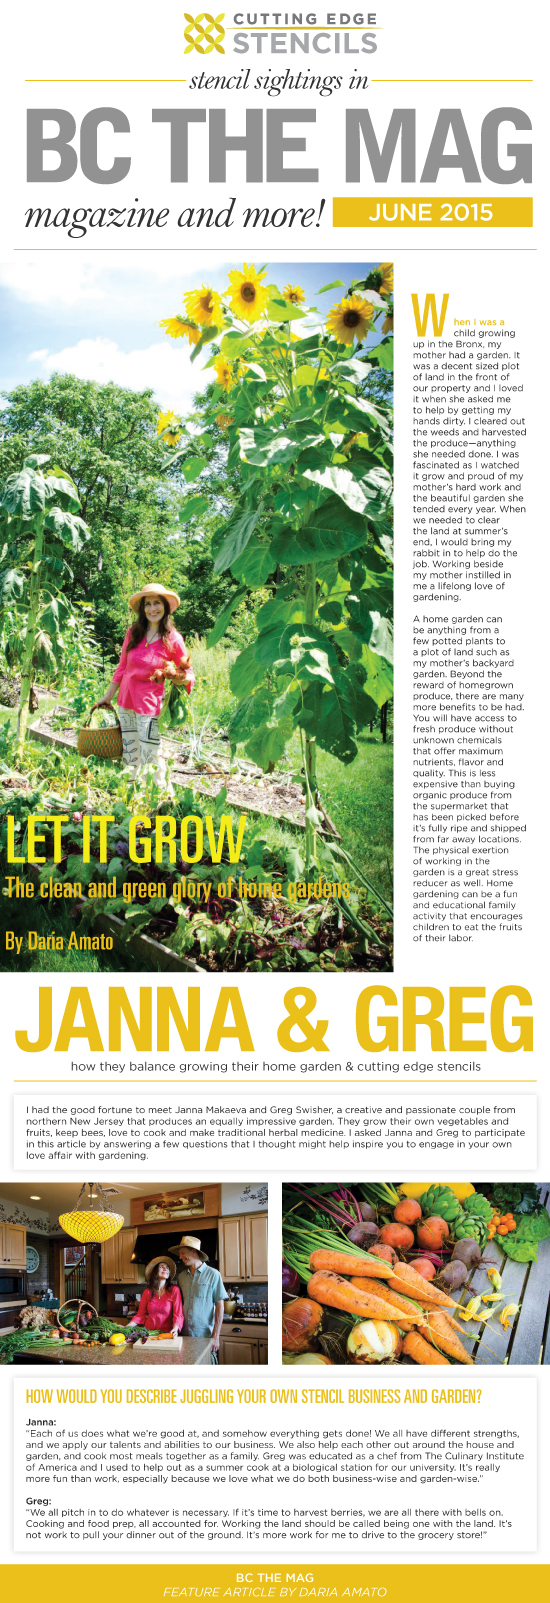 Greg and Janna from Cutting Edge Stencils were featued in Bergen County Magazine for their home garden, beekeeping, and herbal medicine tips. http://www.cuttingedgestencils.com/wall-stencils.html